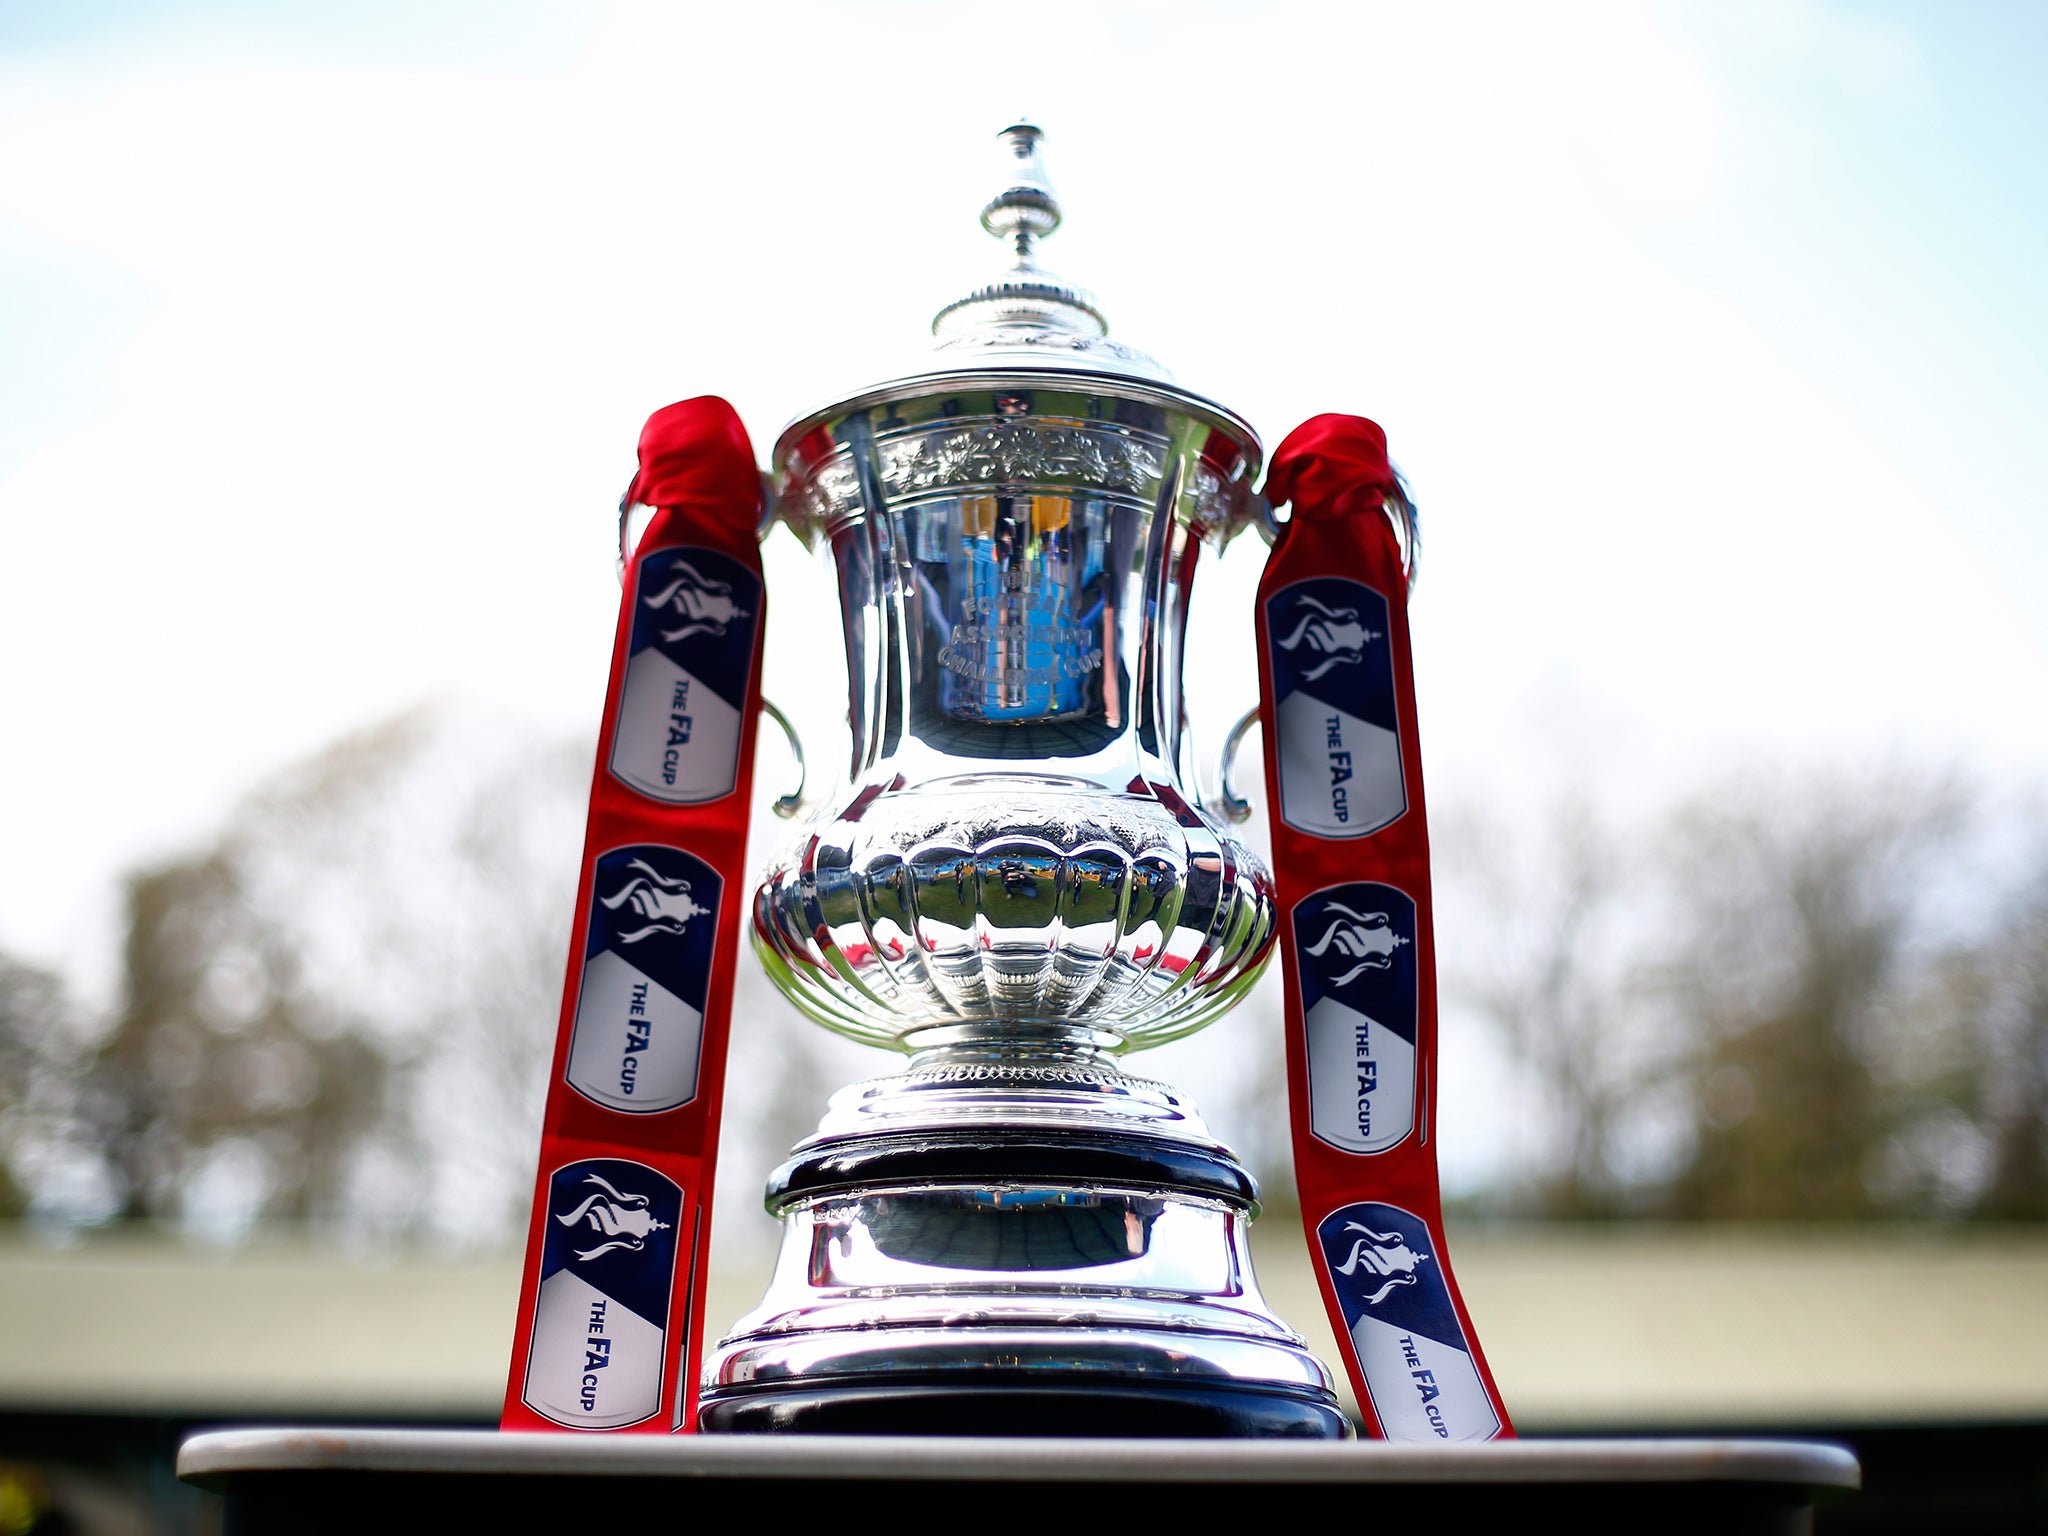 The FA Cup trophy, currently held by Manchester United